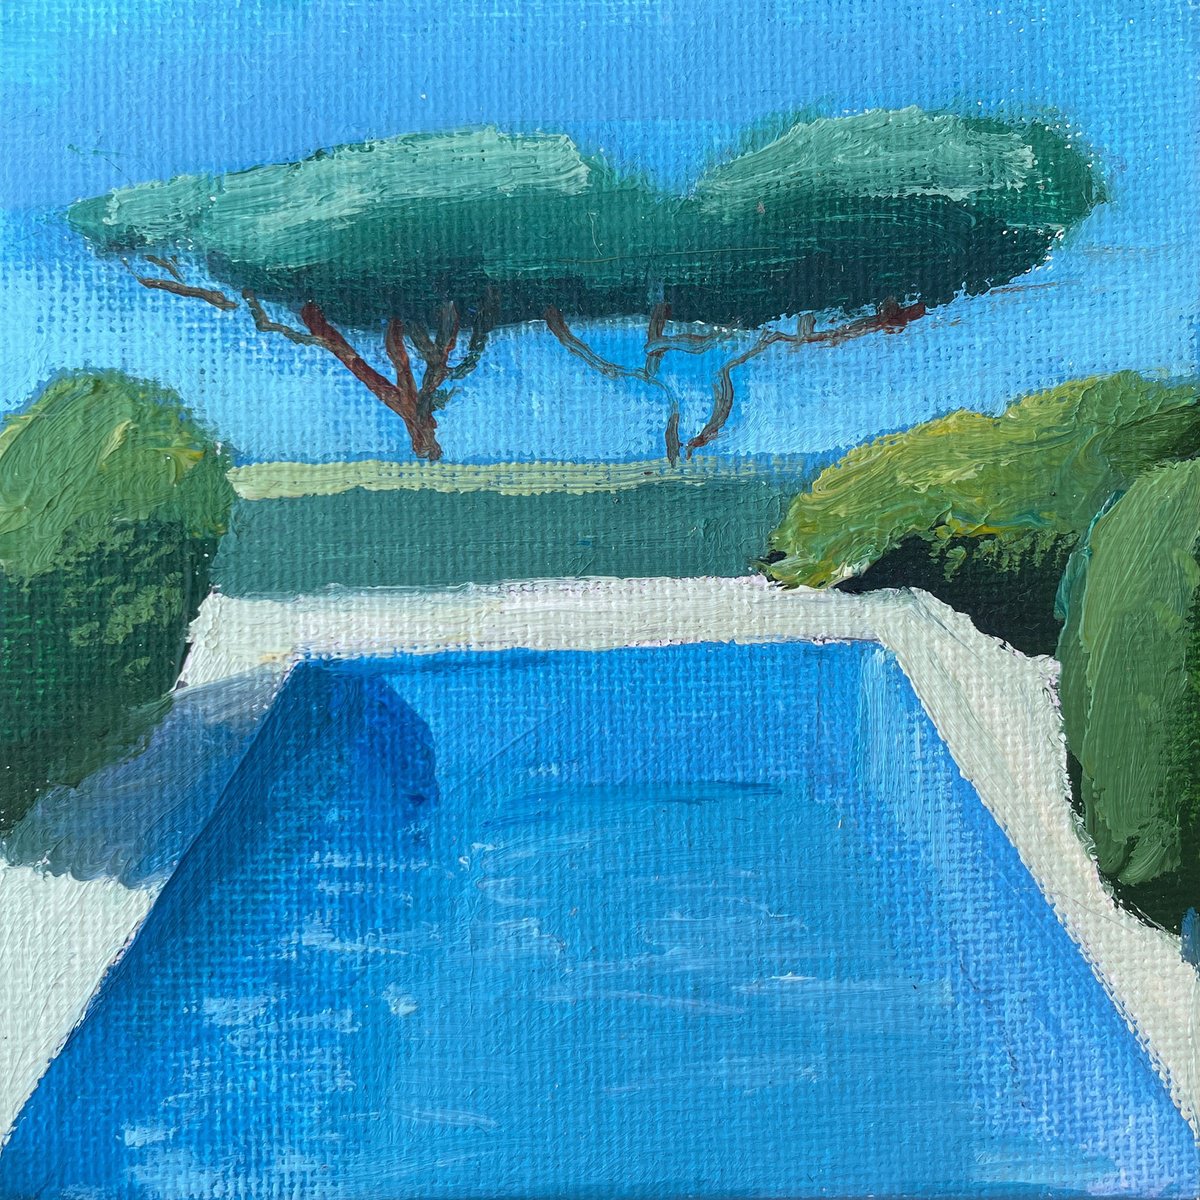 Afternoon by the Pool - 10x10 cm by Victoria Dael